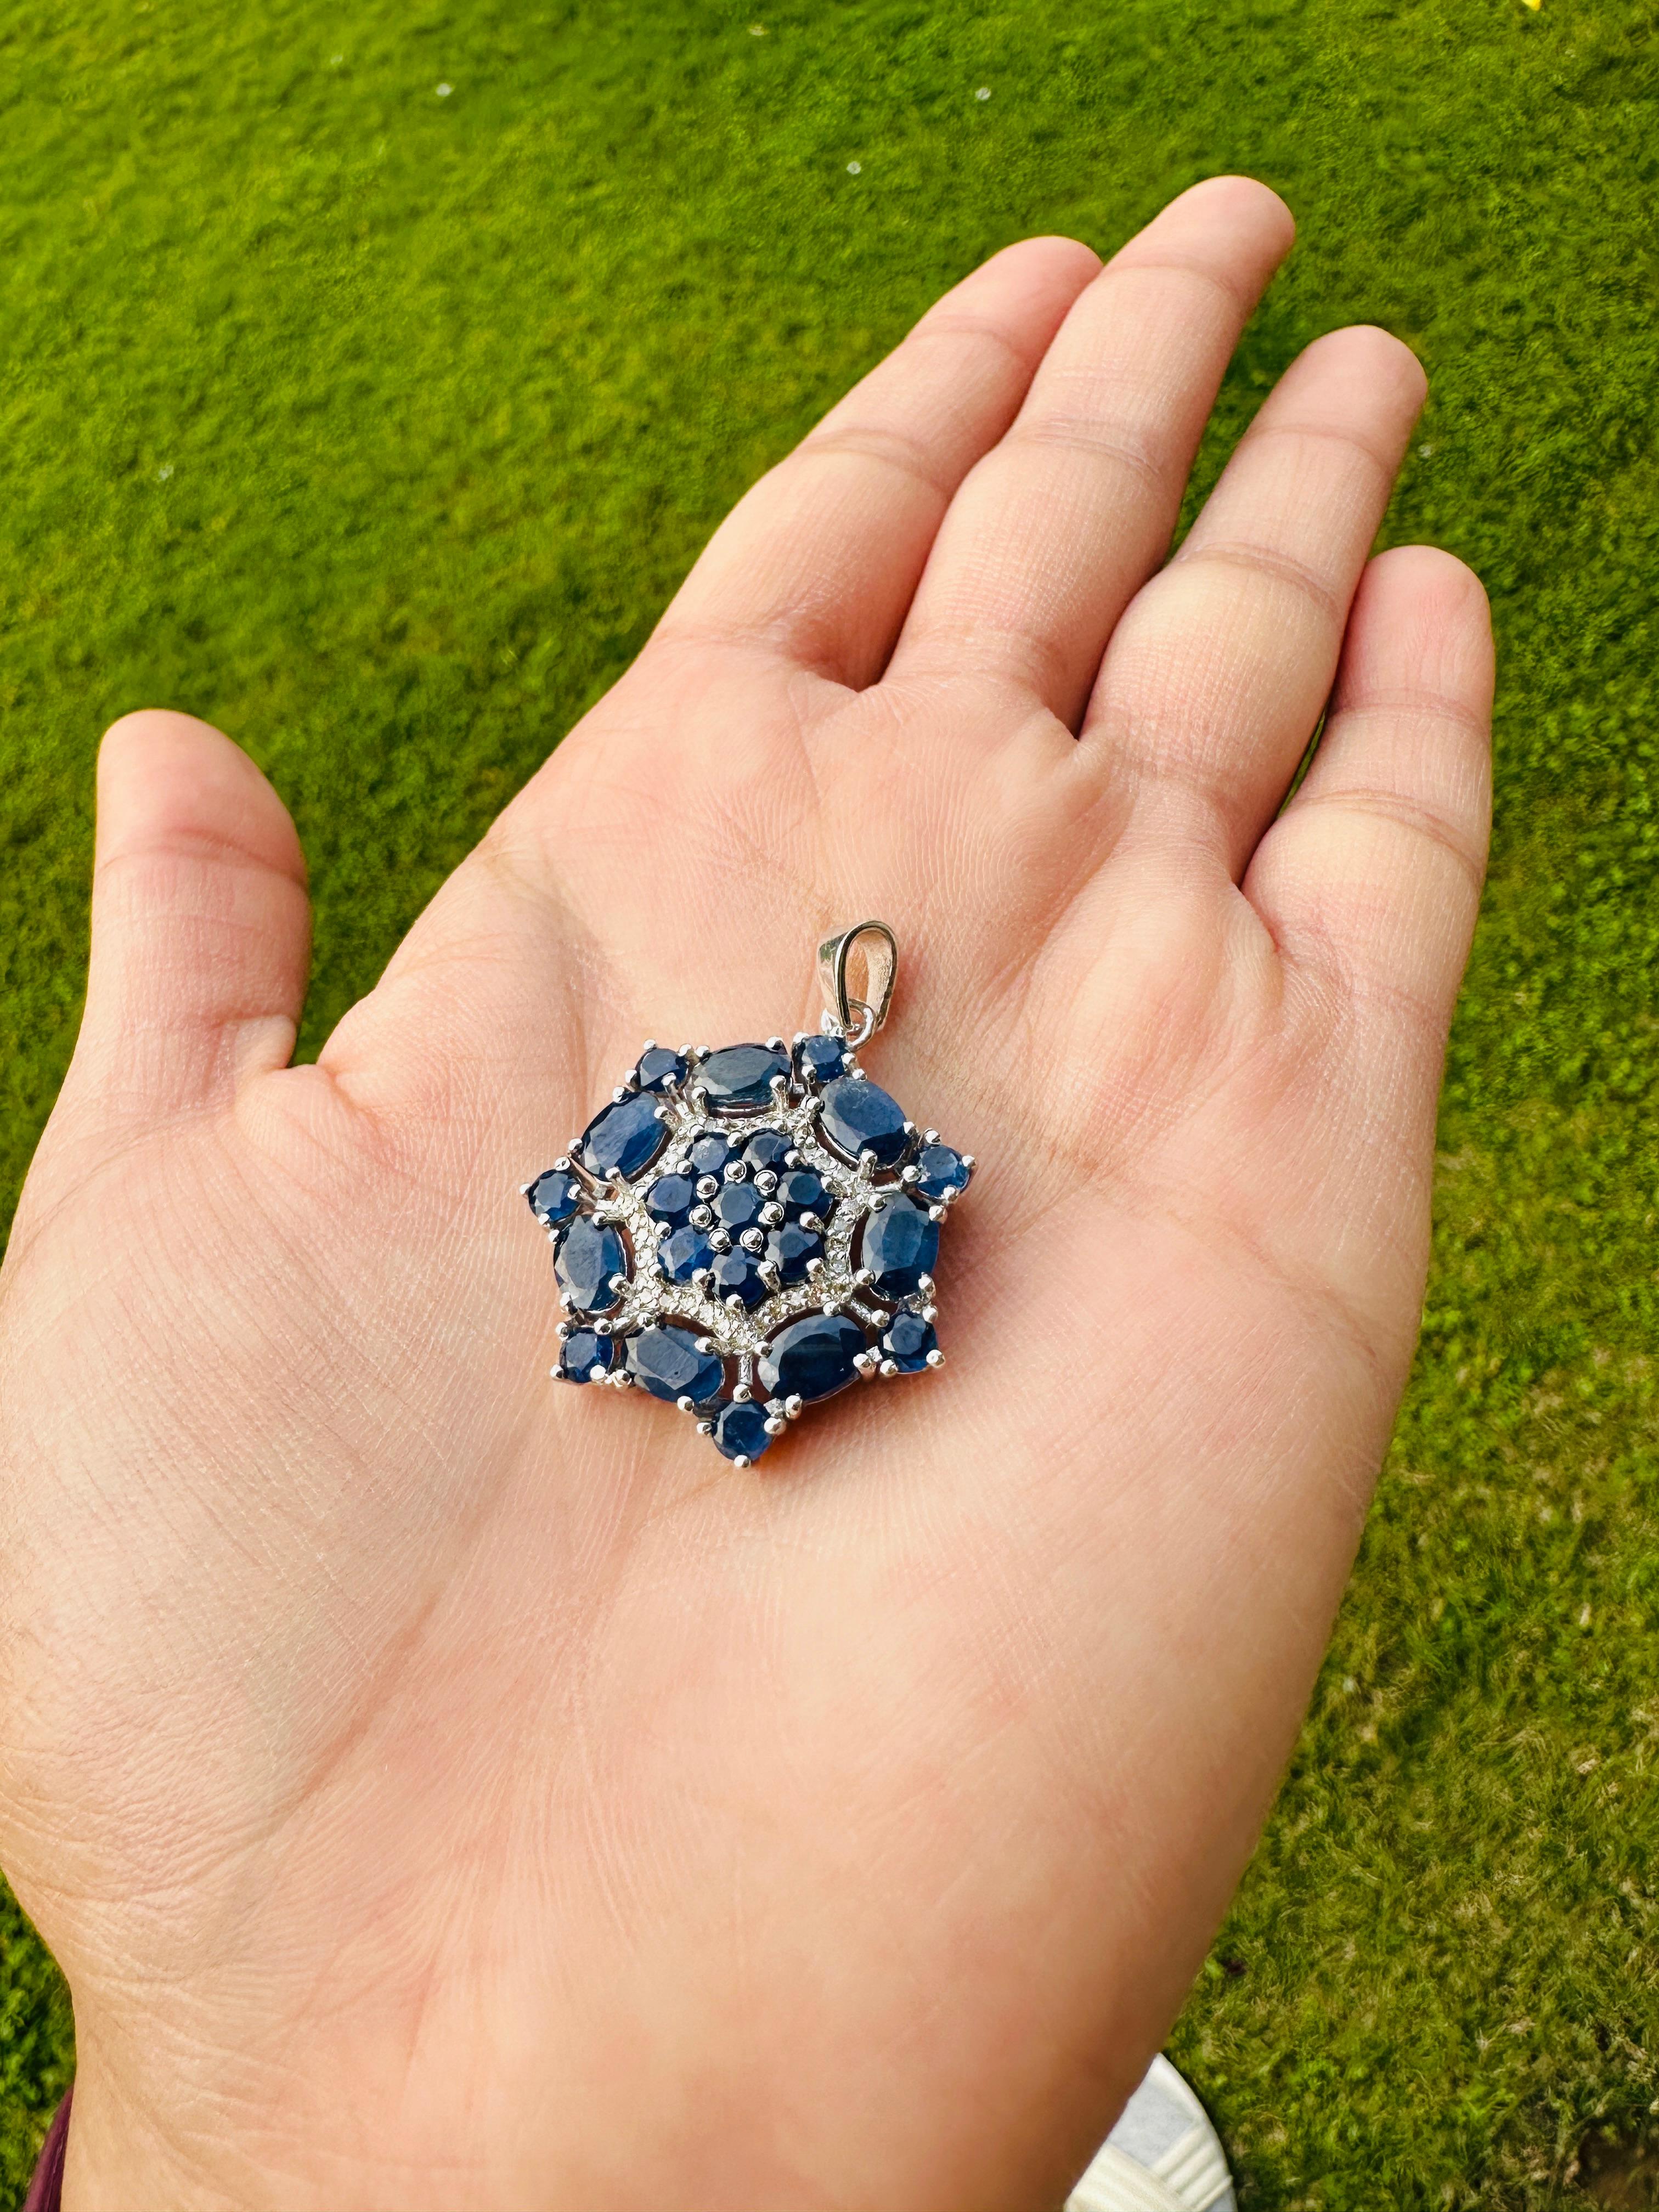 This 7.15 Cts Natural Blue Sapphire Cluster Flower Pendant is meticulously crafted from the finest materials and adorned with stunning blue sapphire which helps in relieving stress, anxiety and depression.
This delicate to statement pendants, suits